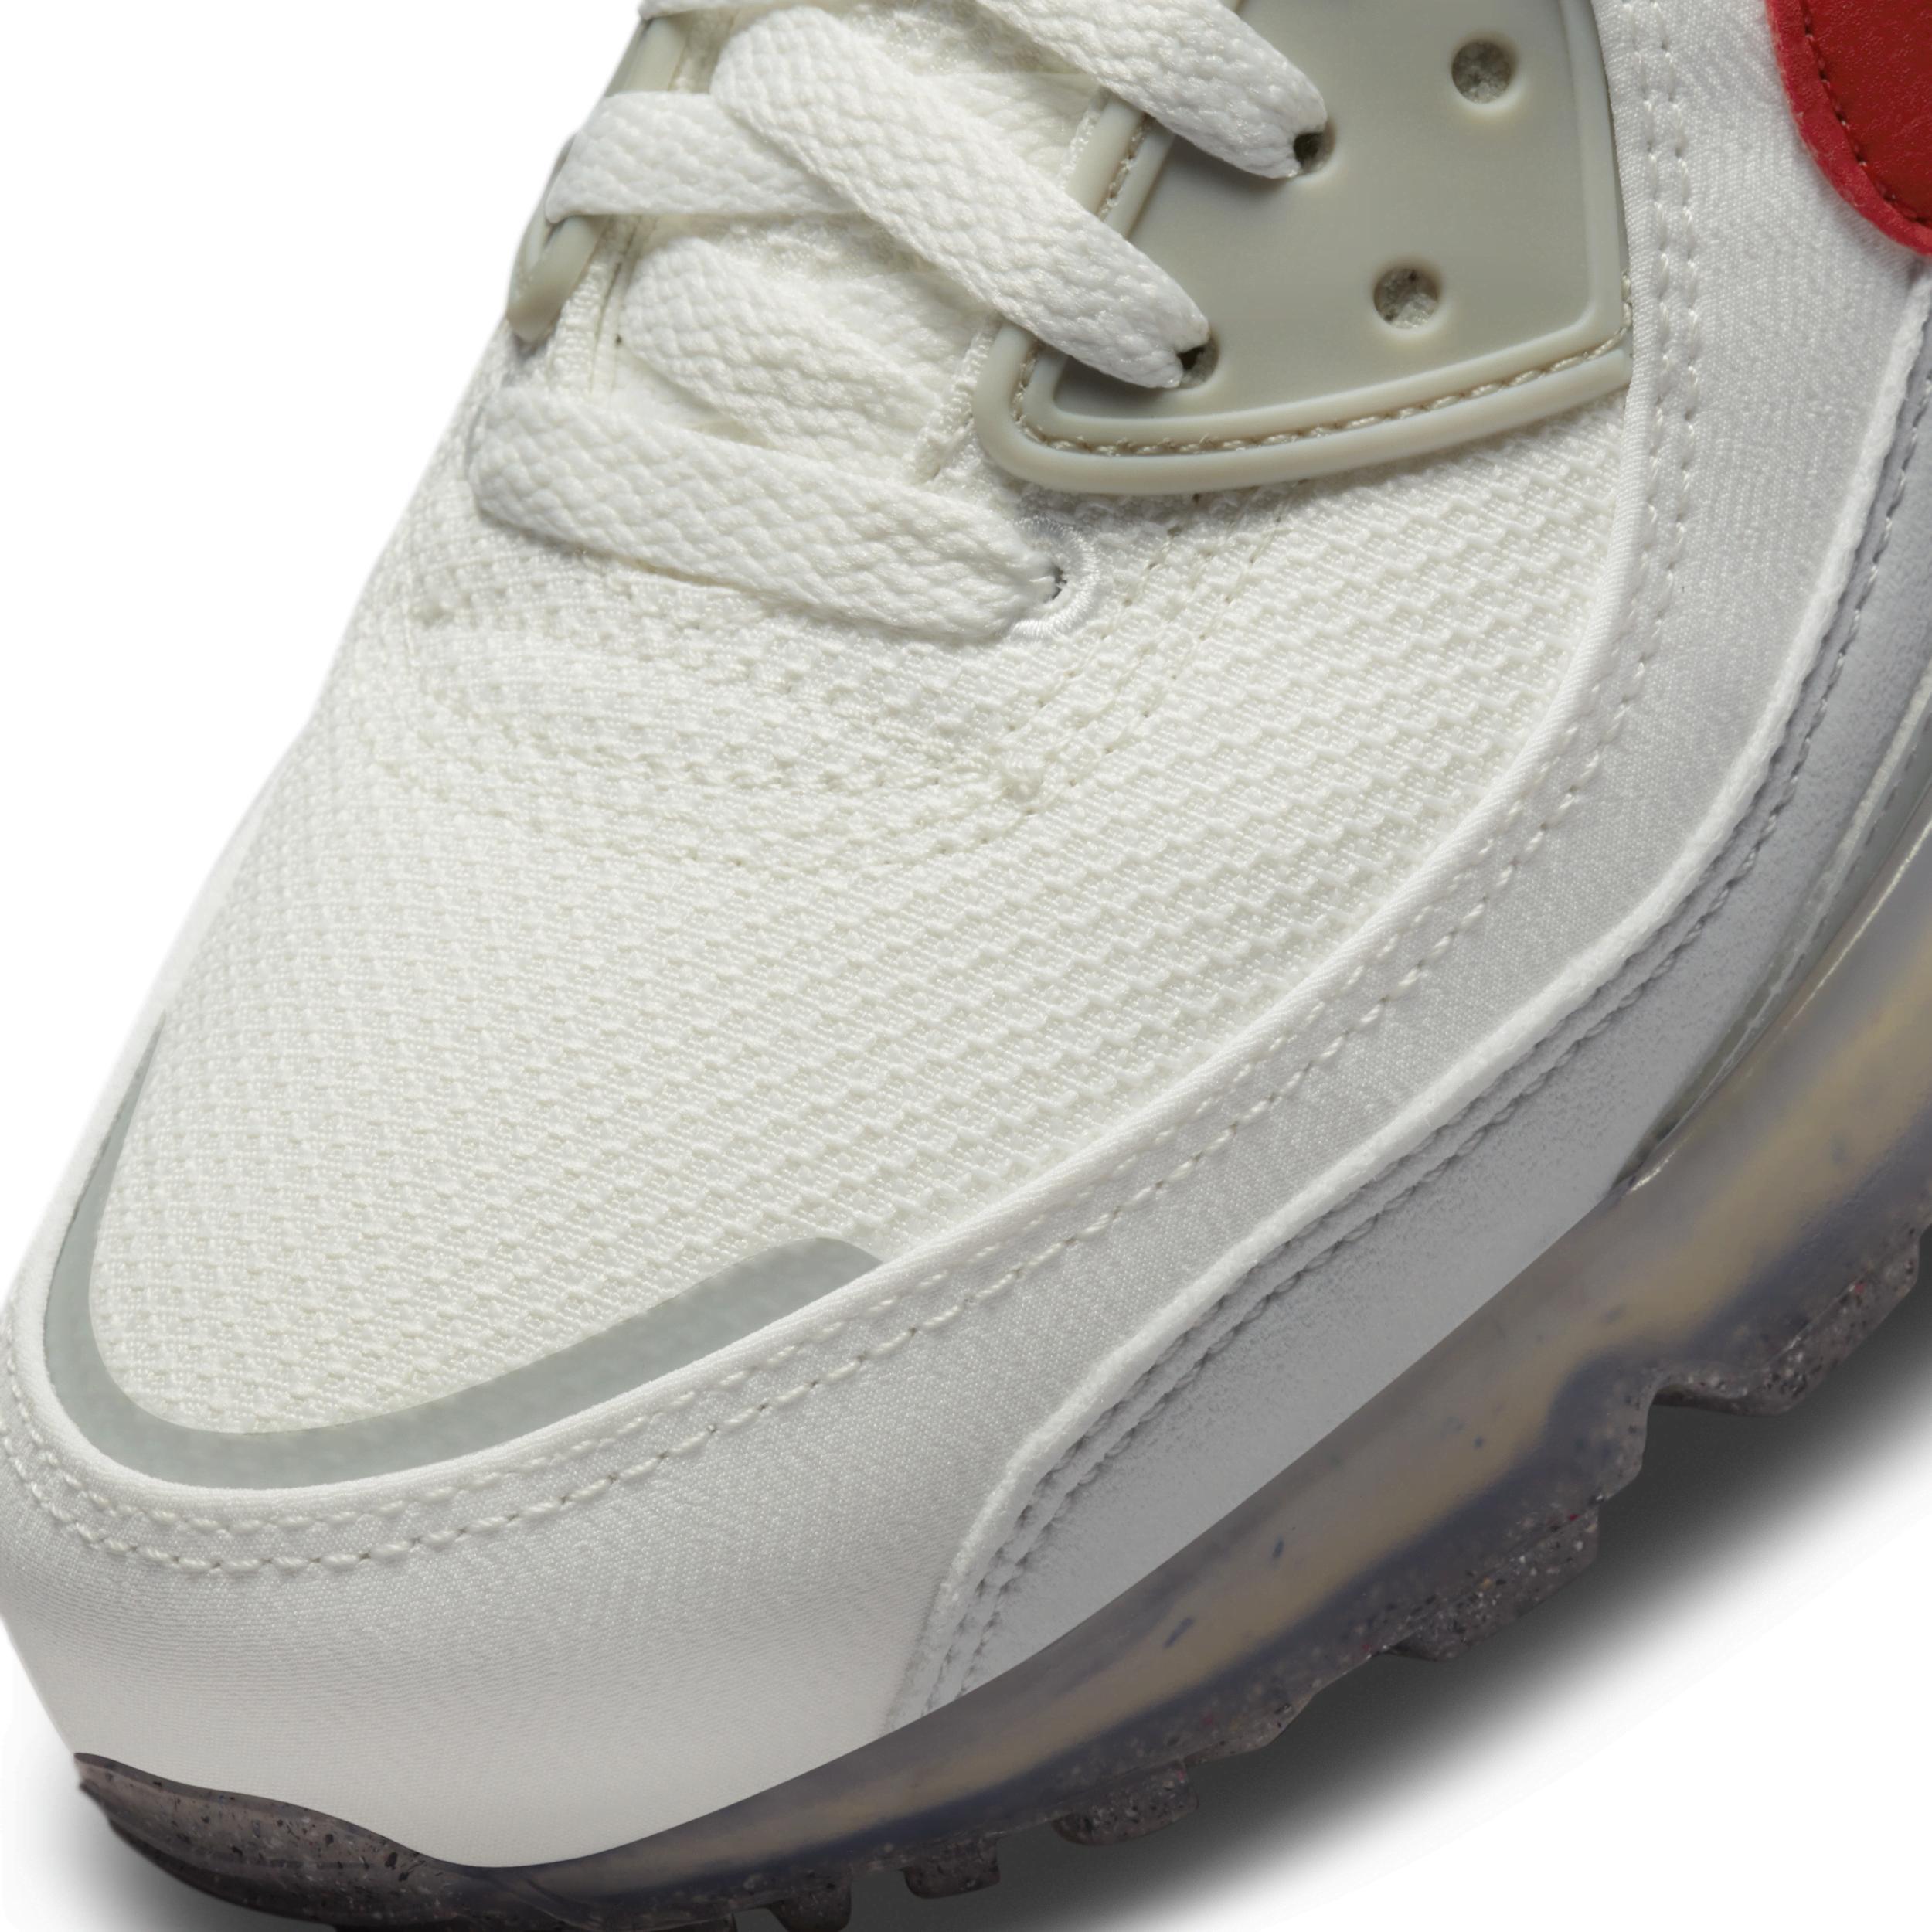 Nike Men's Air Max Terrascape 90 Shoes Product Image